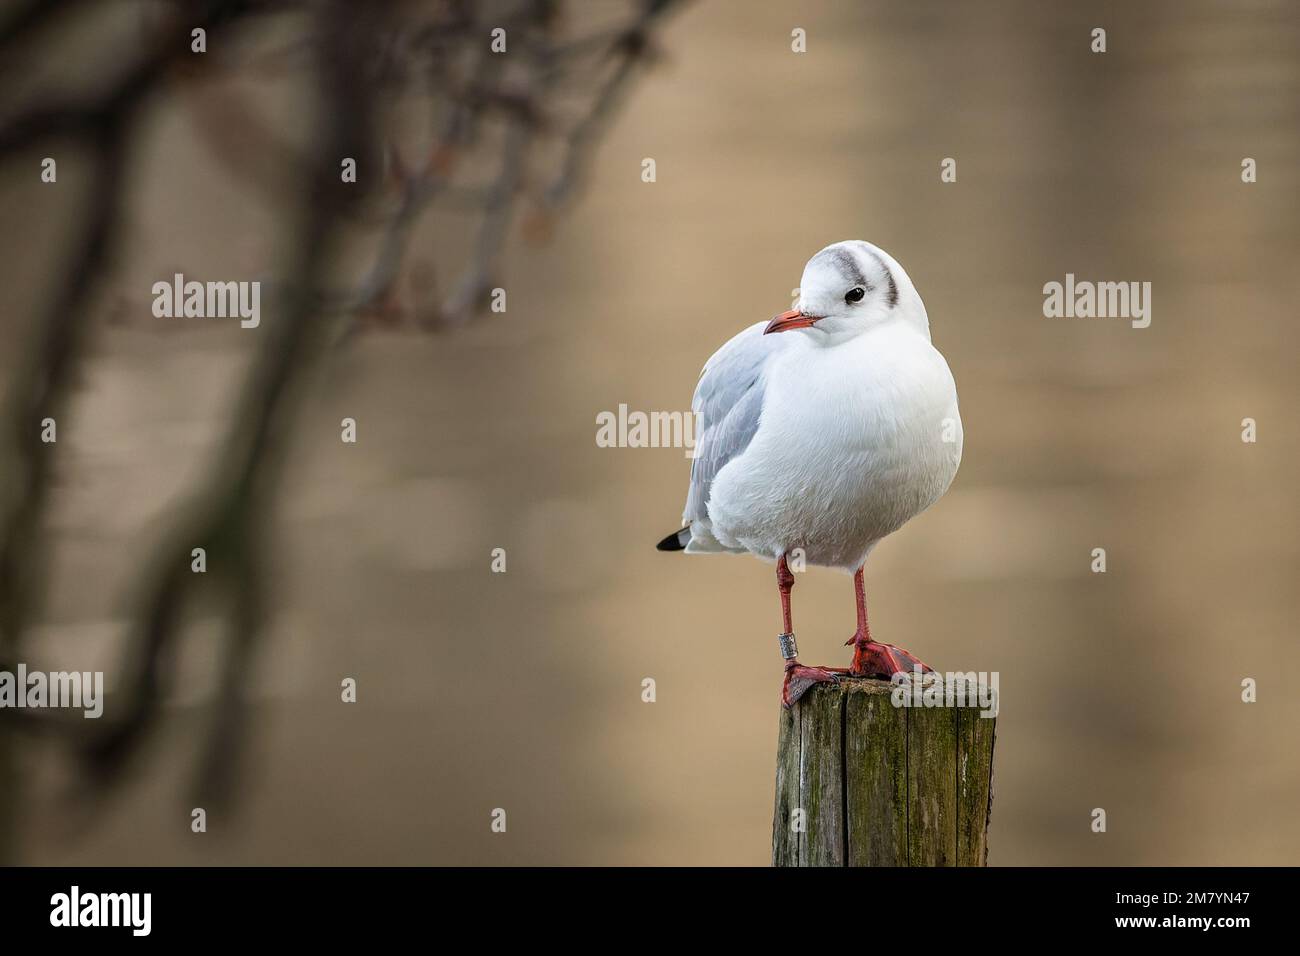 The black-headed gull with red beak and legs, an adult, standing on a wooden pole. Blurry brown water and a branch in the background. Stock Photo